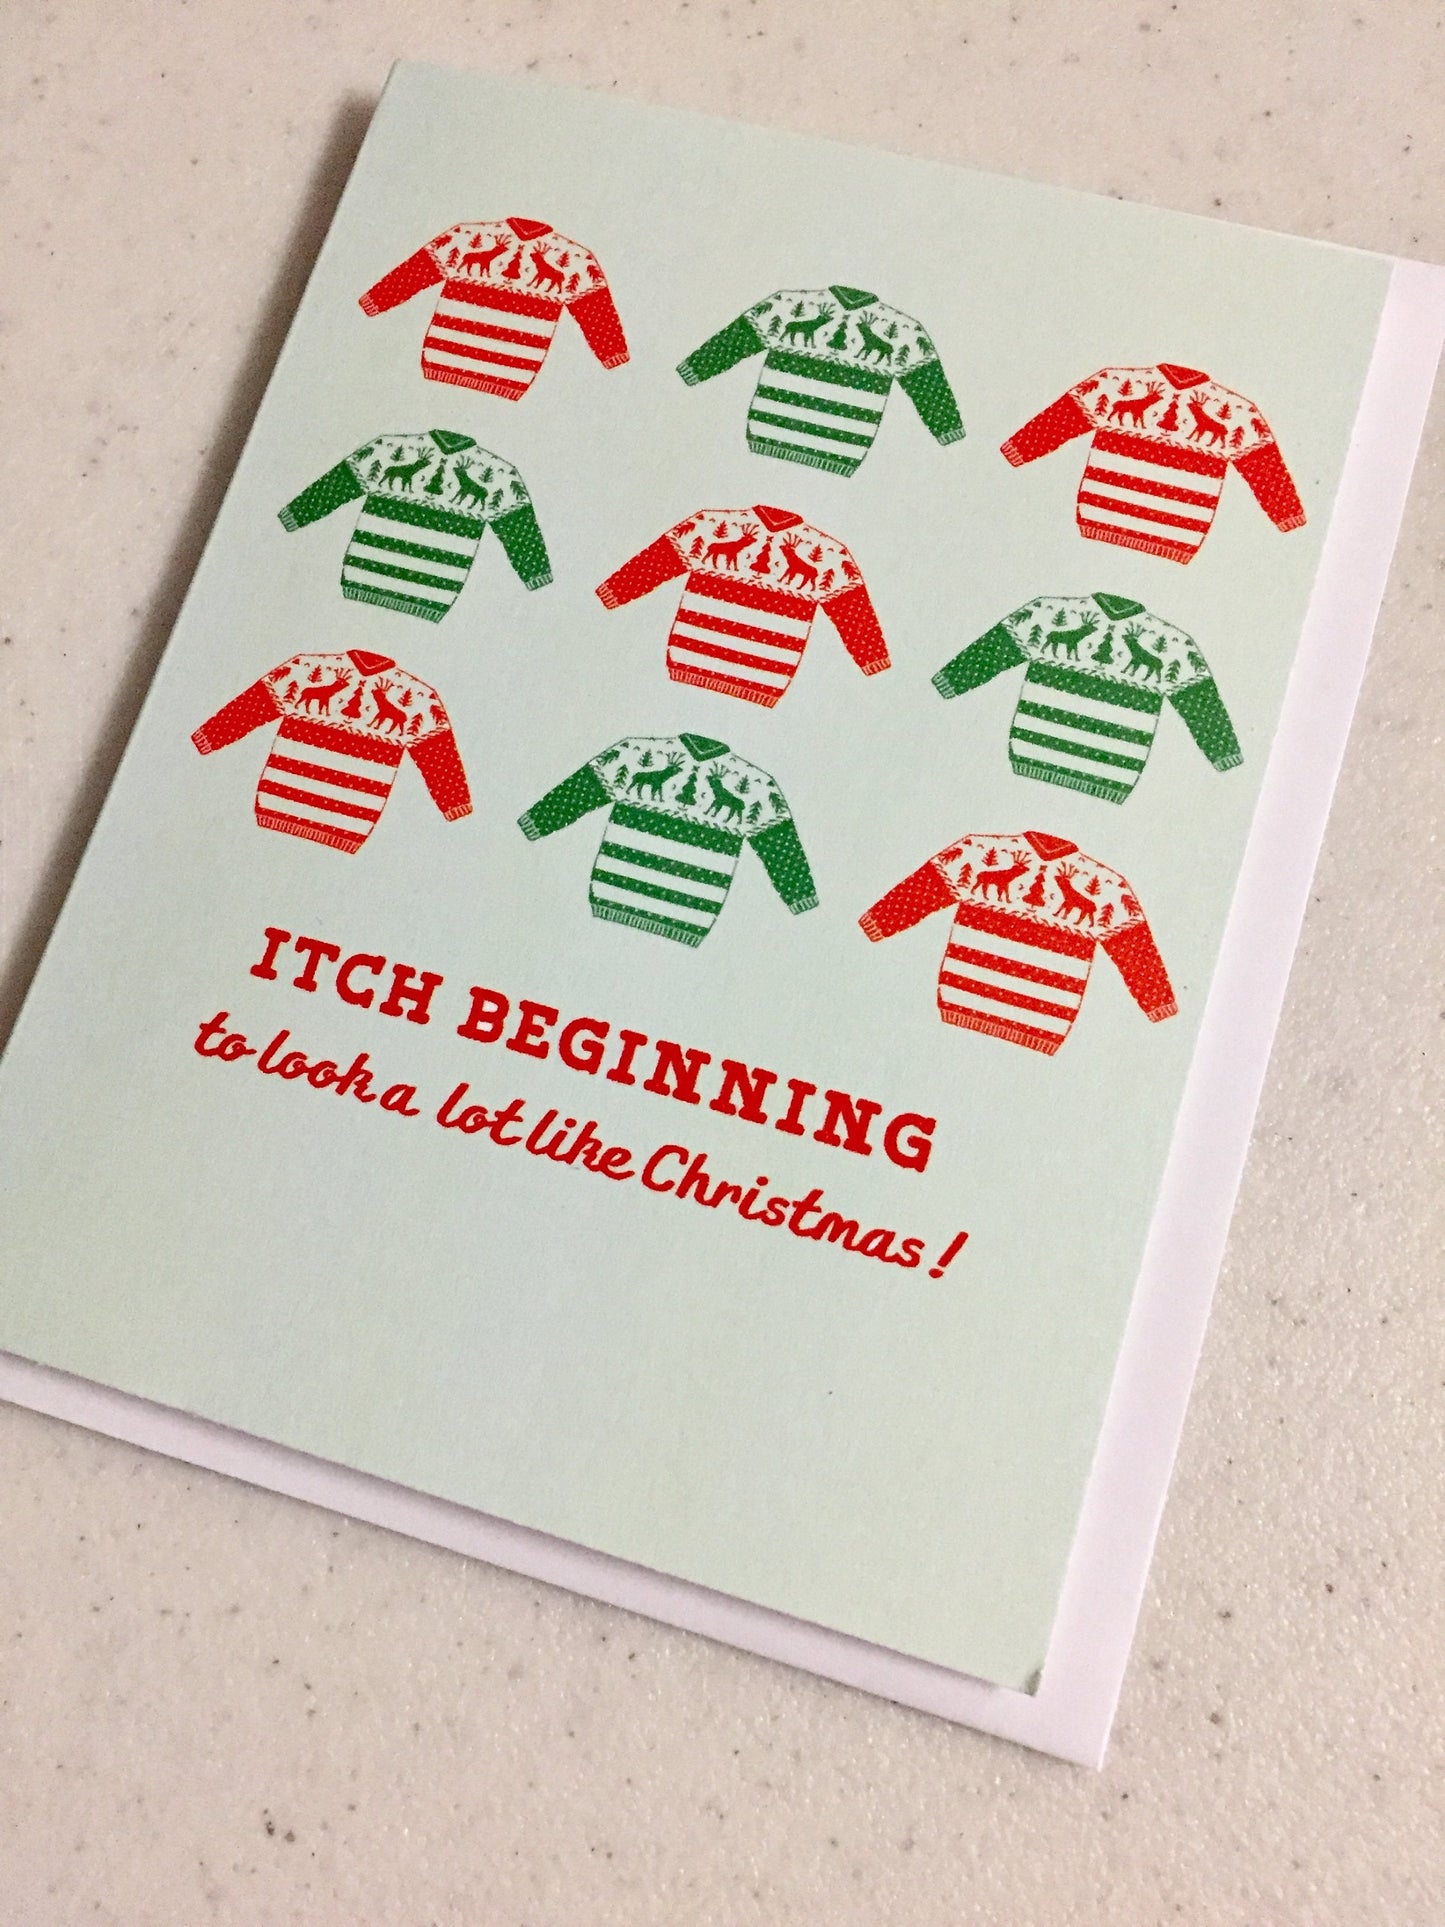 Ugly Sweater Christmas Card - Ugly Jumper Card, Festive Sweater Punny Christmas card with foiled lettering